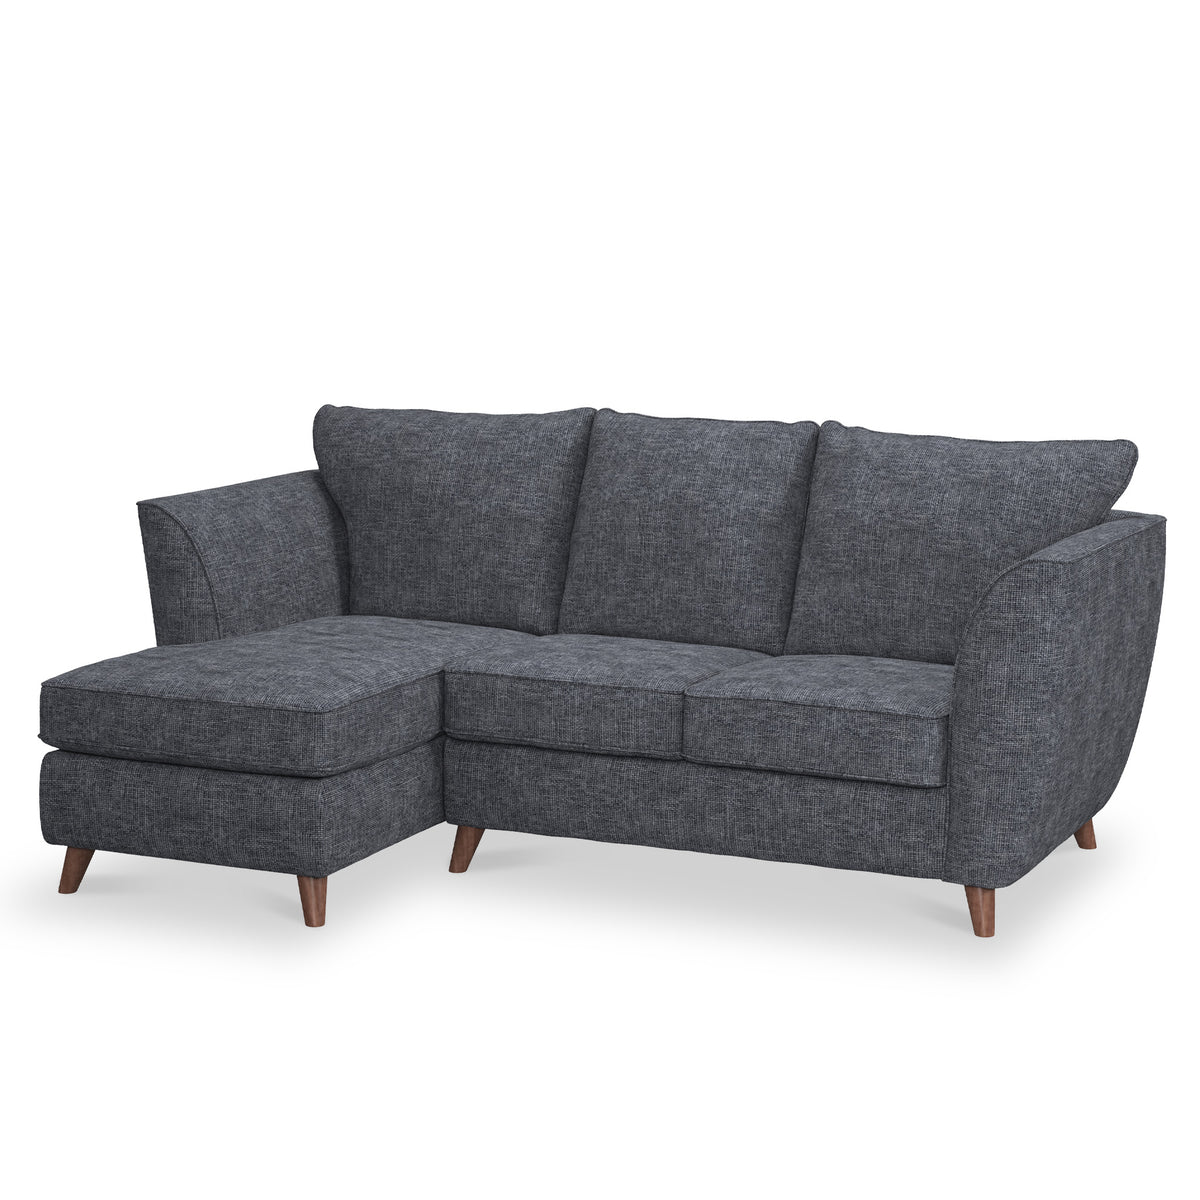 Tamsin Navy Left Hand Chaise Sofa from Roseland Furniture